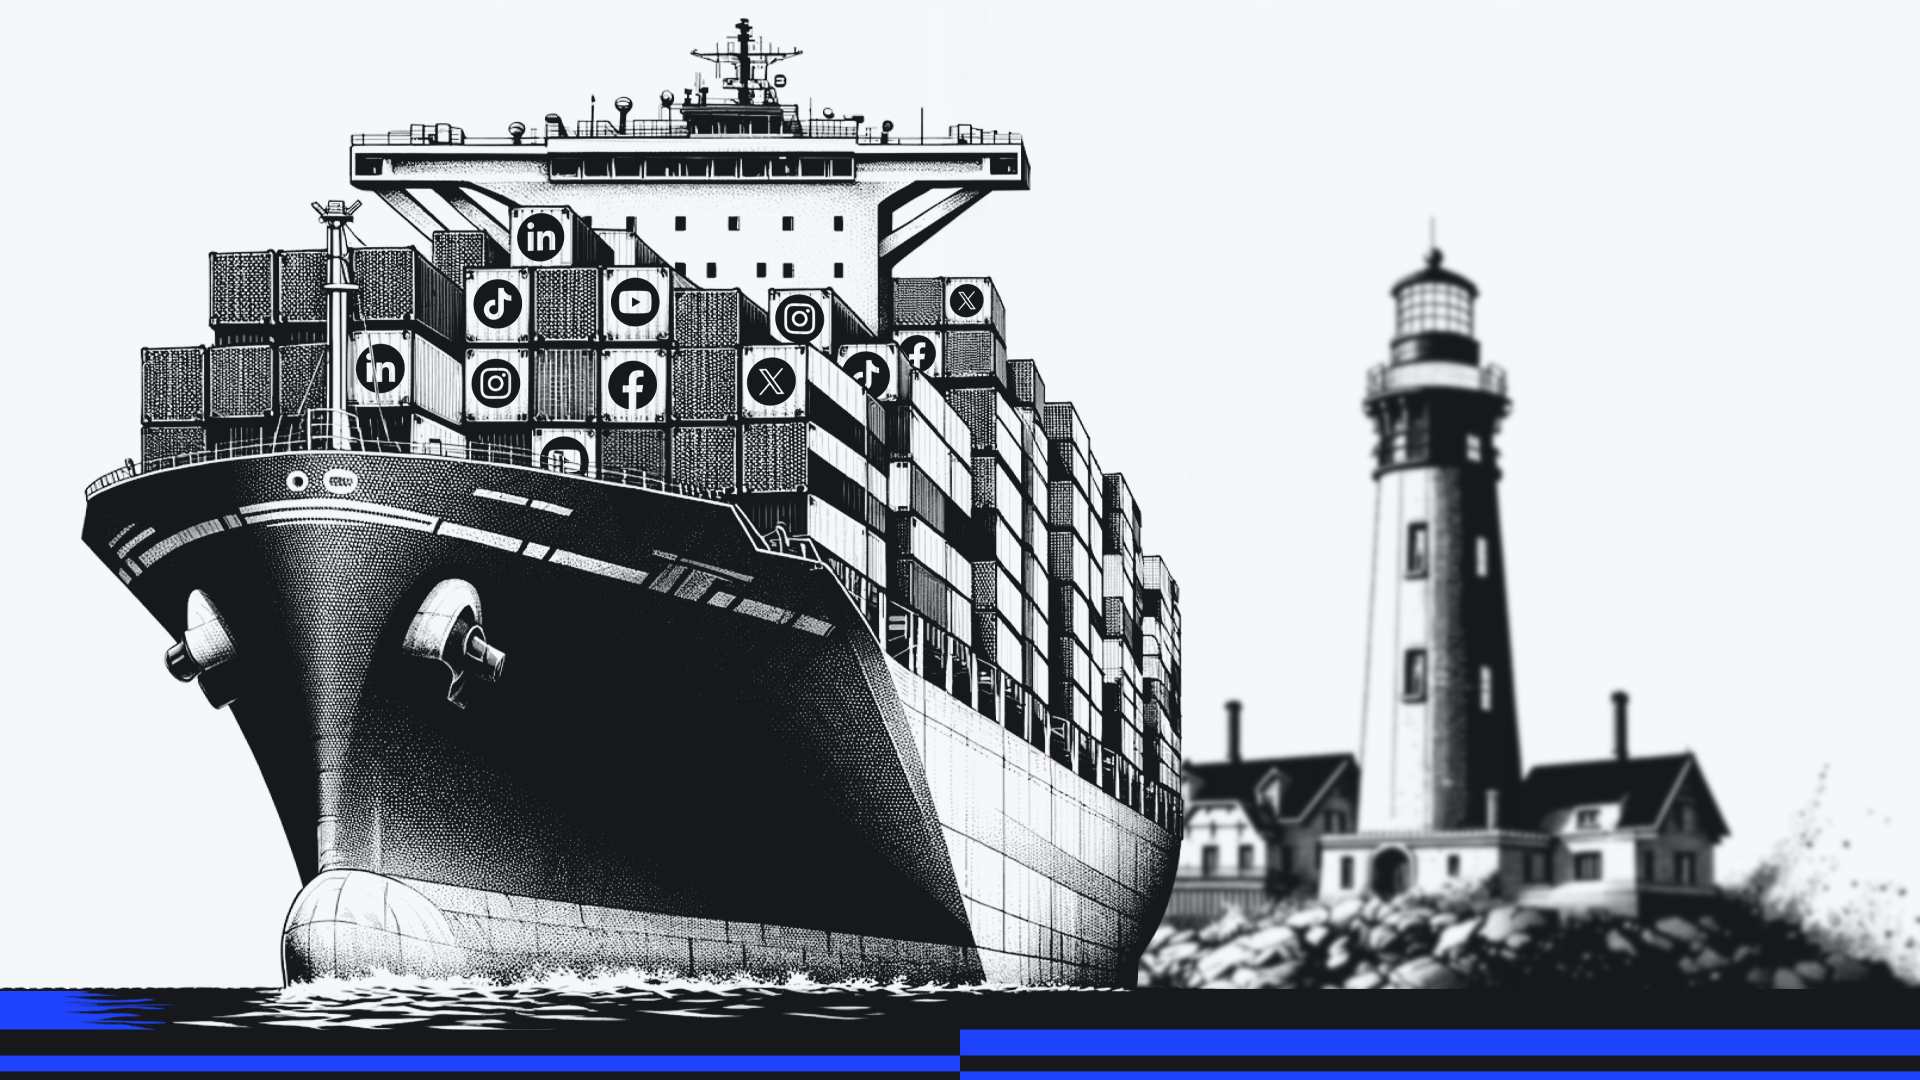 A cargo ship with containers labeled with social media logos near a lighthouse.